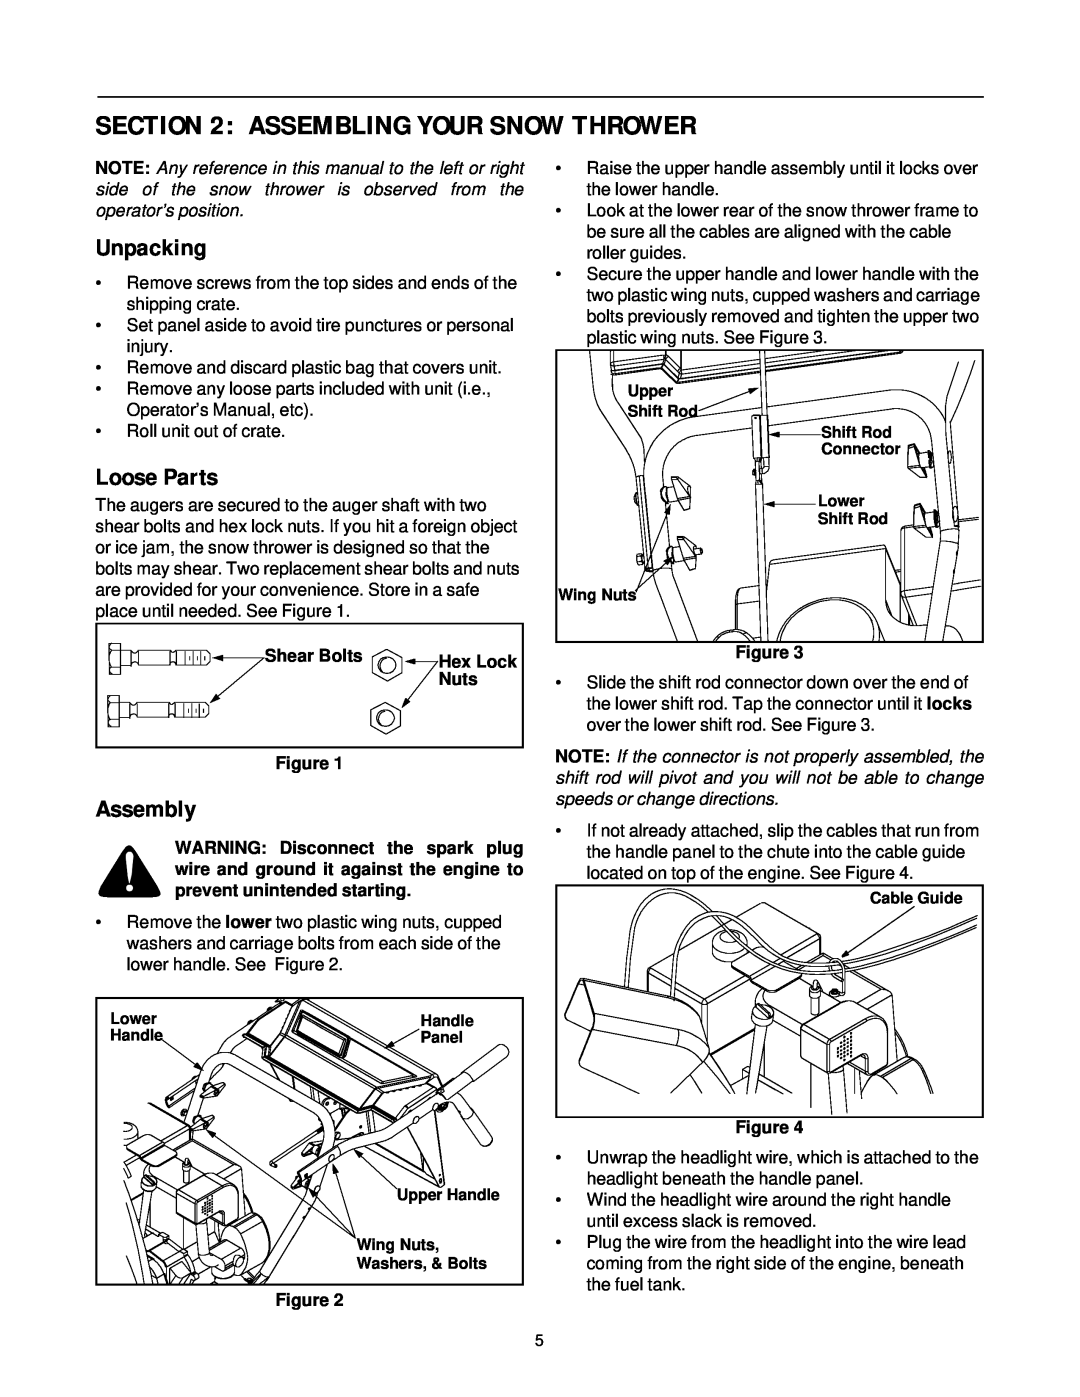 Cub Cadet 850 SWE manual Assembling Your Snow Thrower, Unpacking, Loose Parts, Assembly, Shear Bolts, Hex Lock, Nuts 